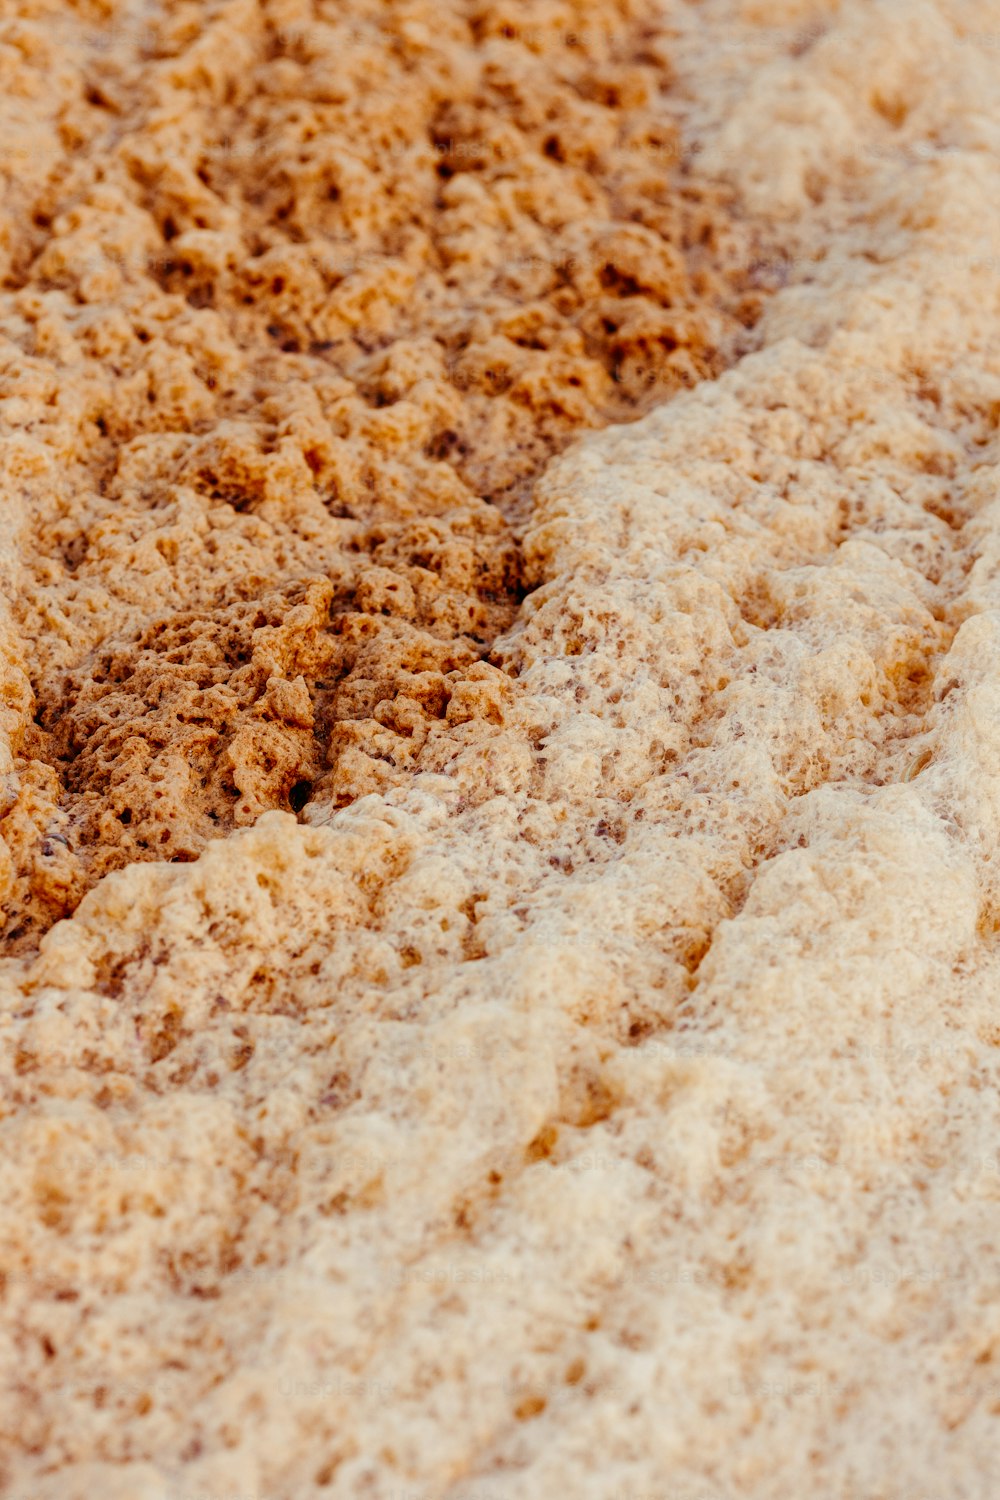 a close up of a brown substance on a white surface